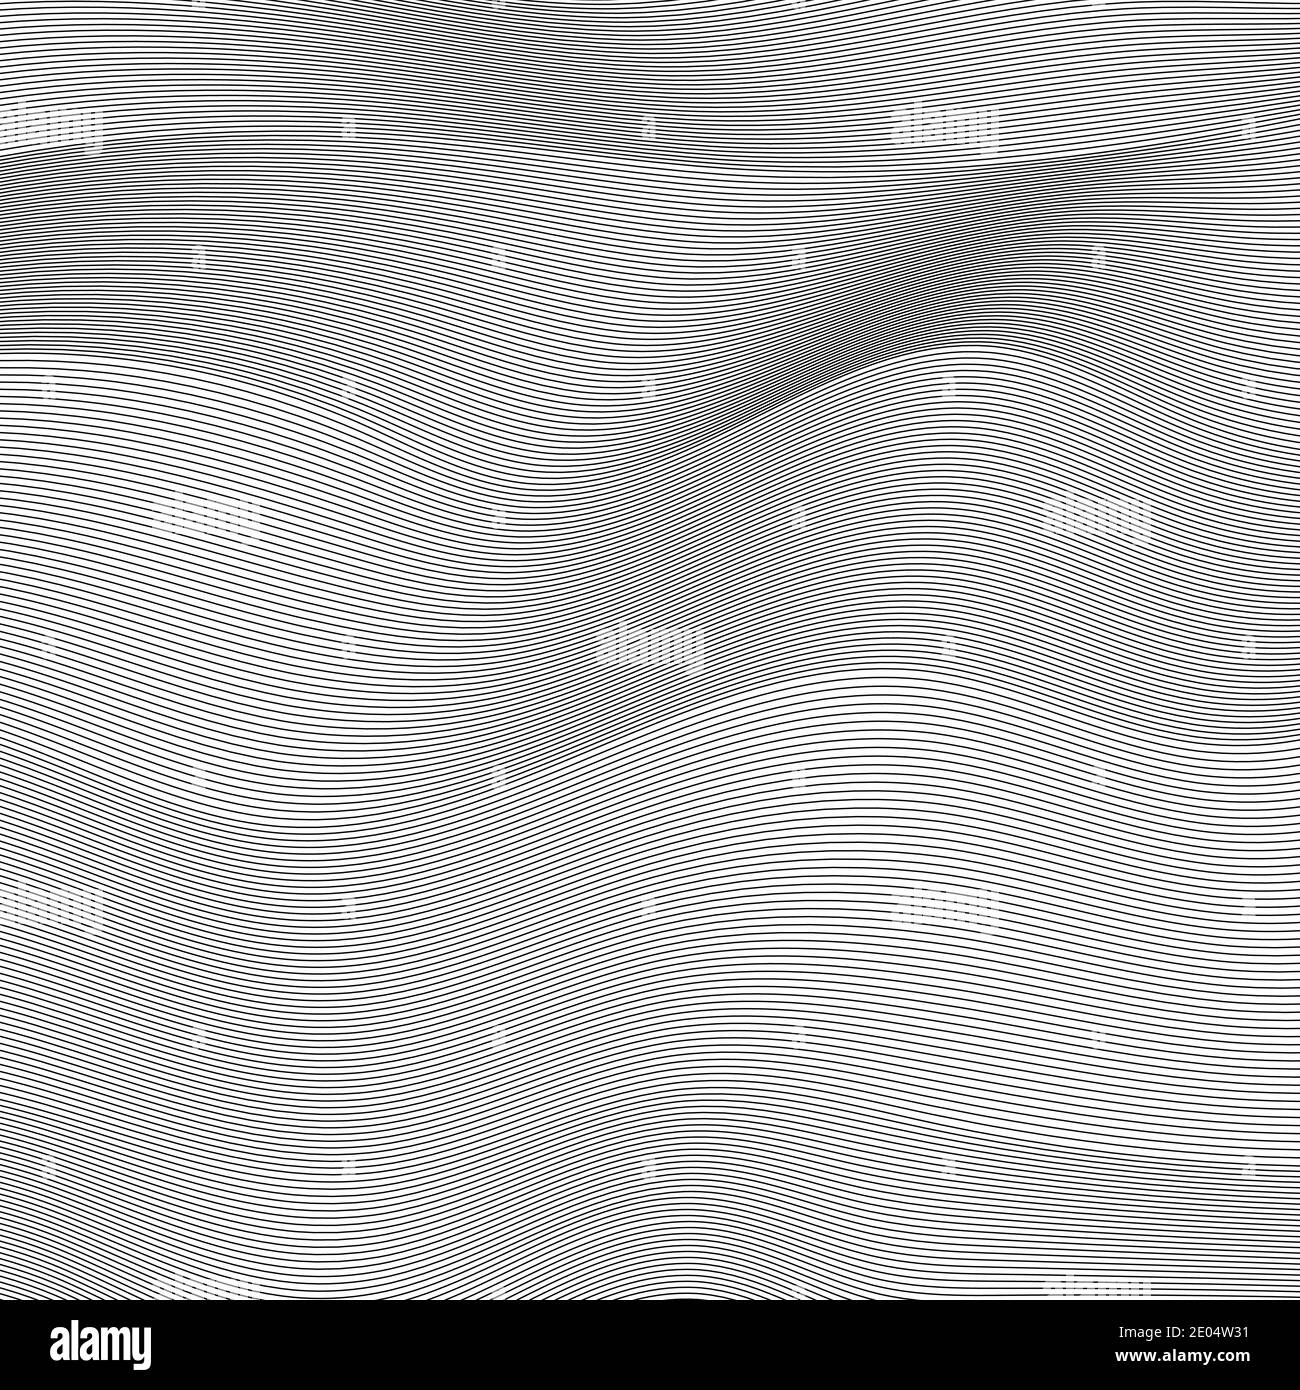 background wavy lines abstract pattern vector wavy surface texture lines Stock Vector